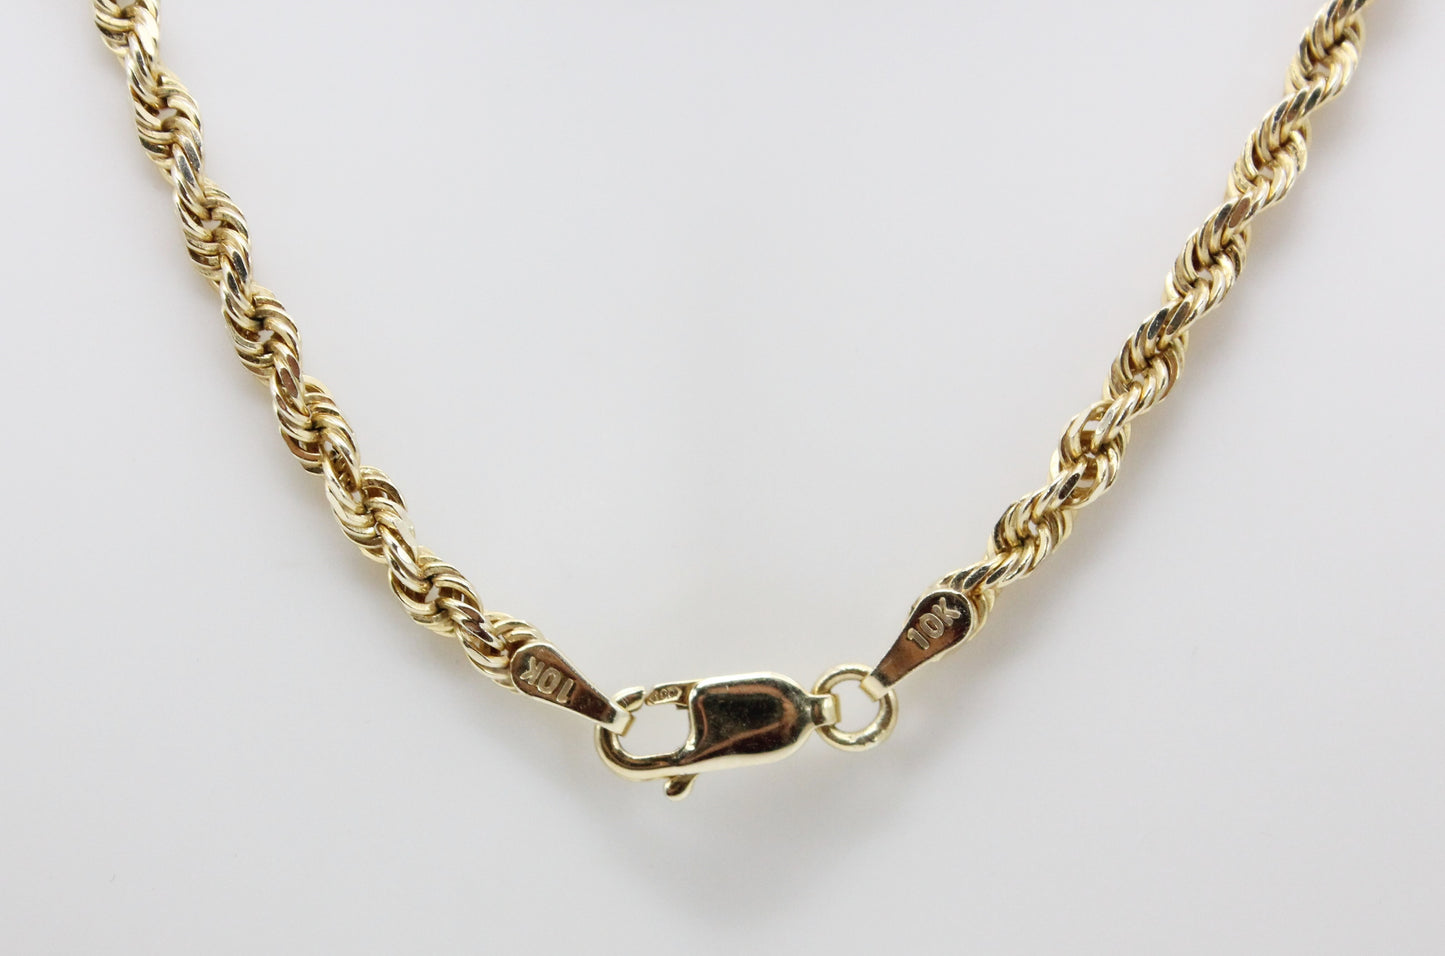 10k Yellow Gold Solid Rope Chain, 19 inches - 10.5 grams